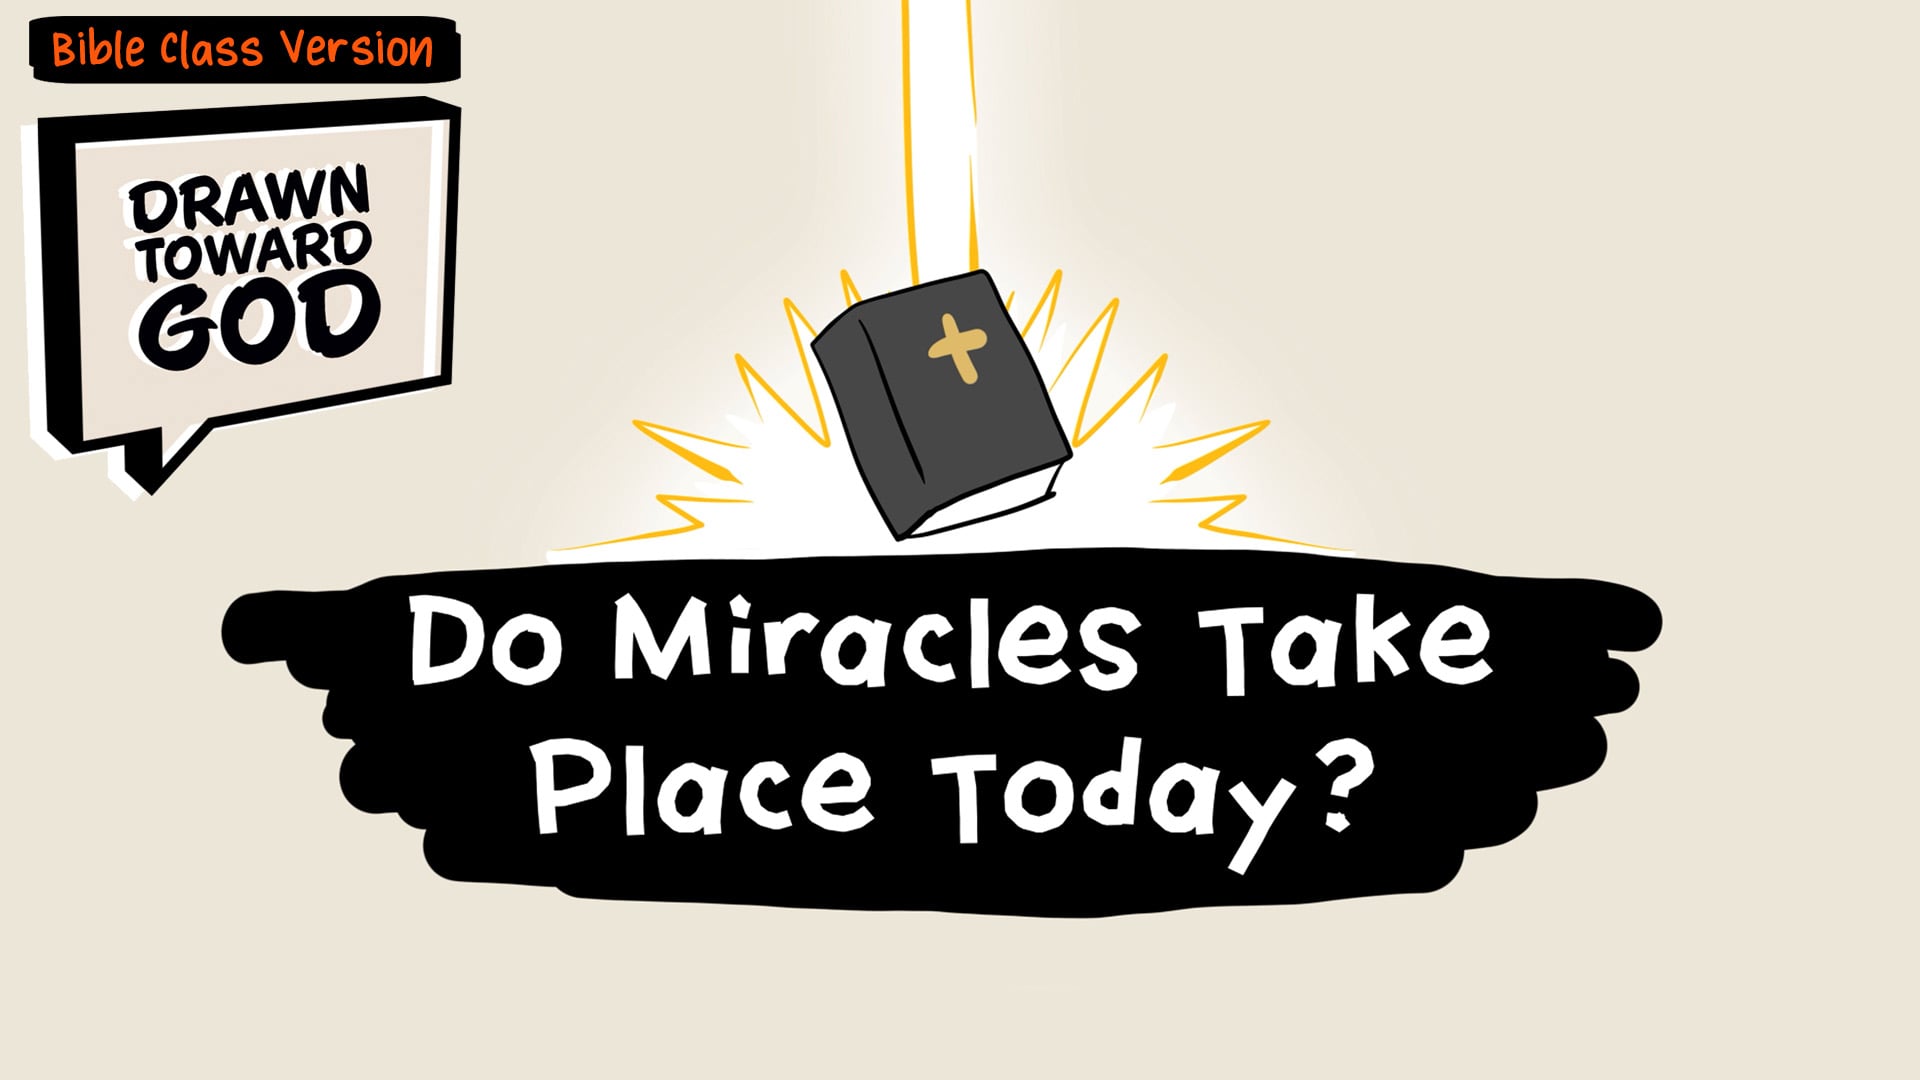 Do Miracles Happen Today?